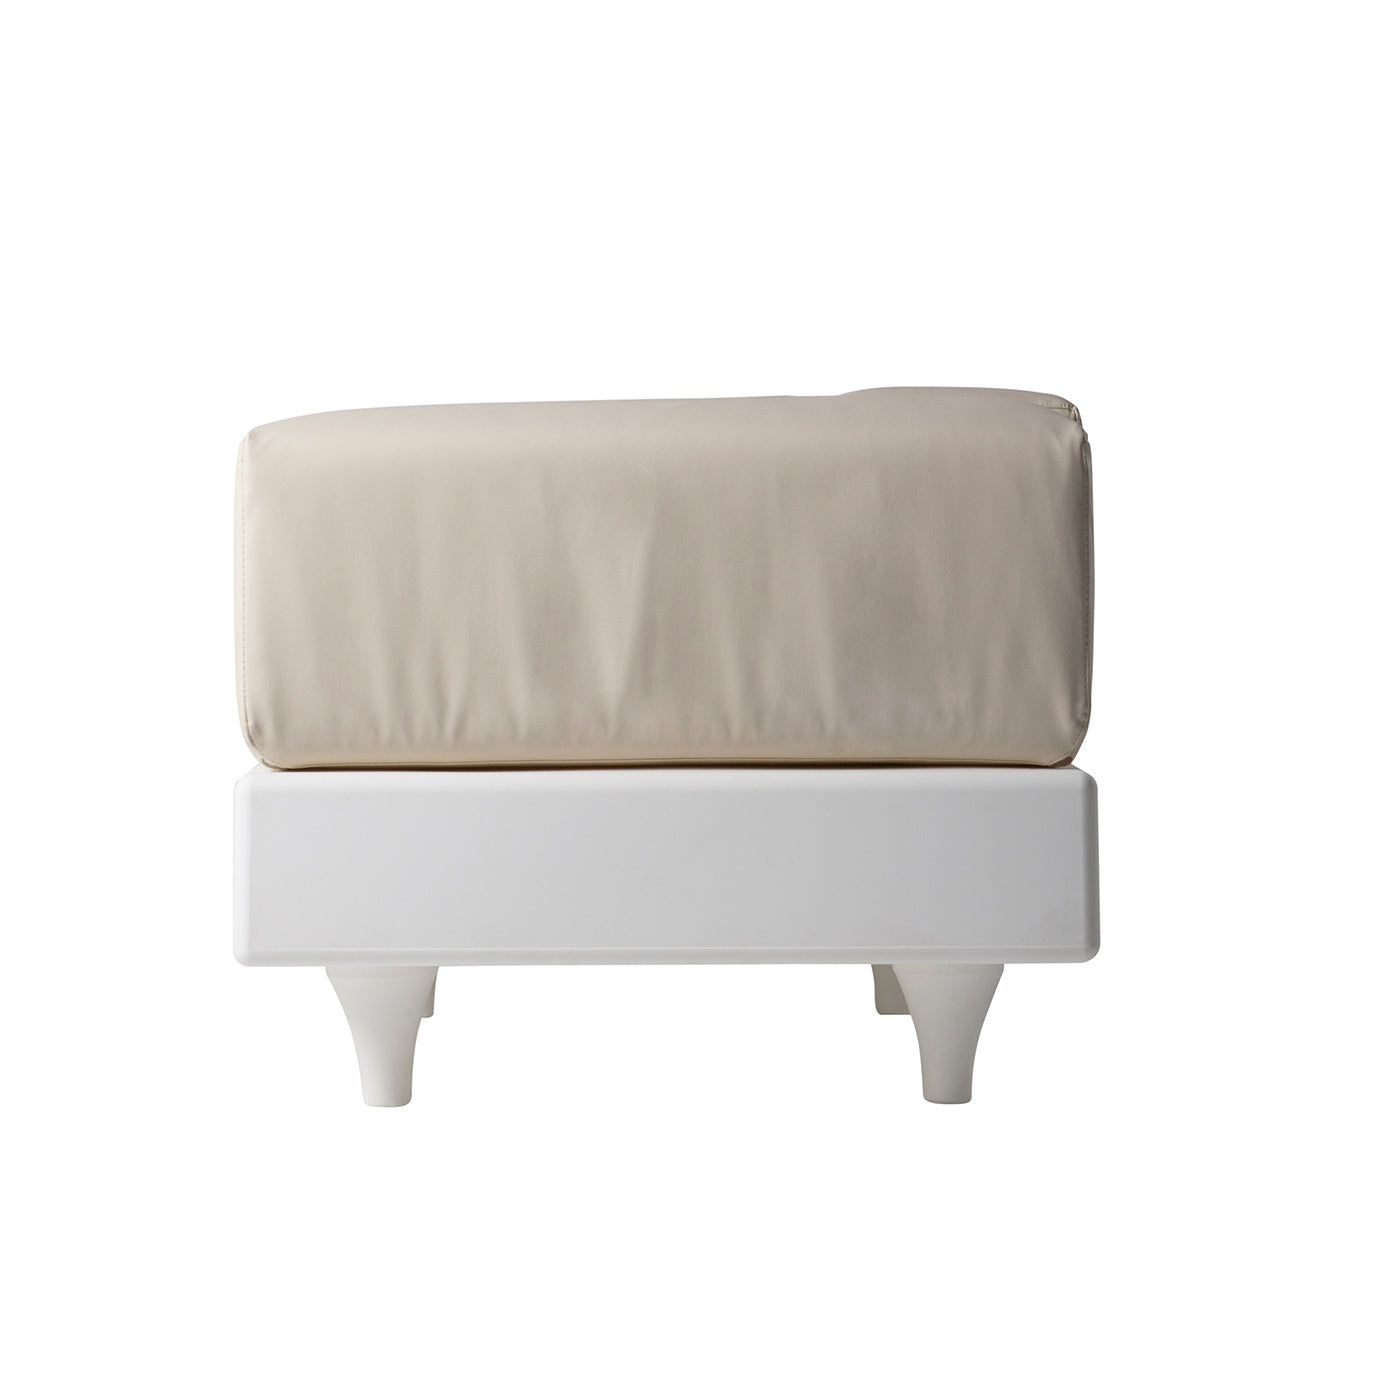 Happylife 2-Seater White and Beige Sofa - Alternative view 1